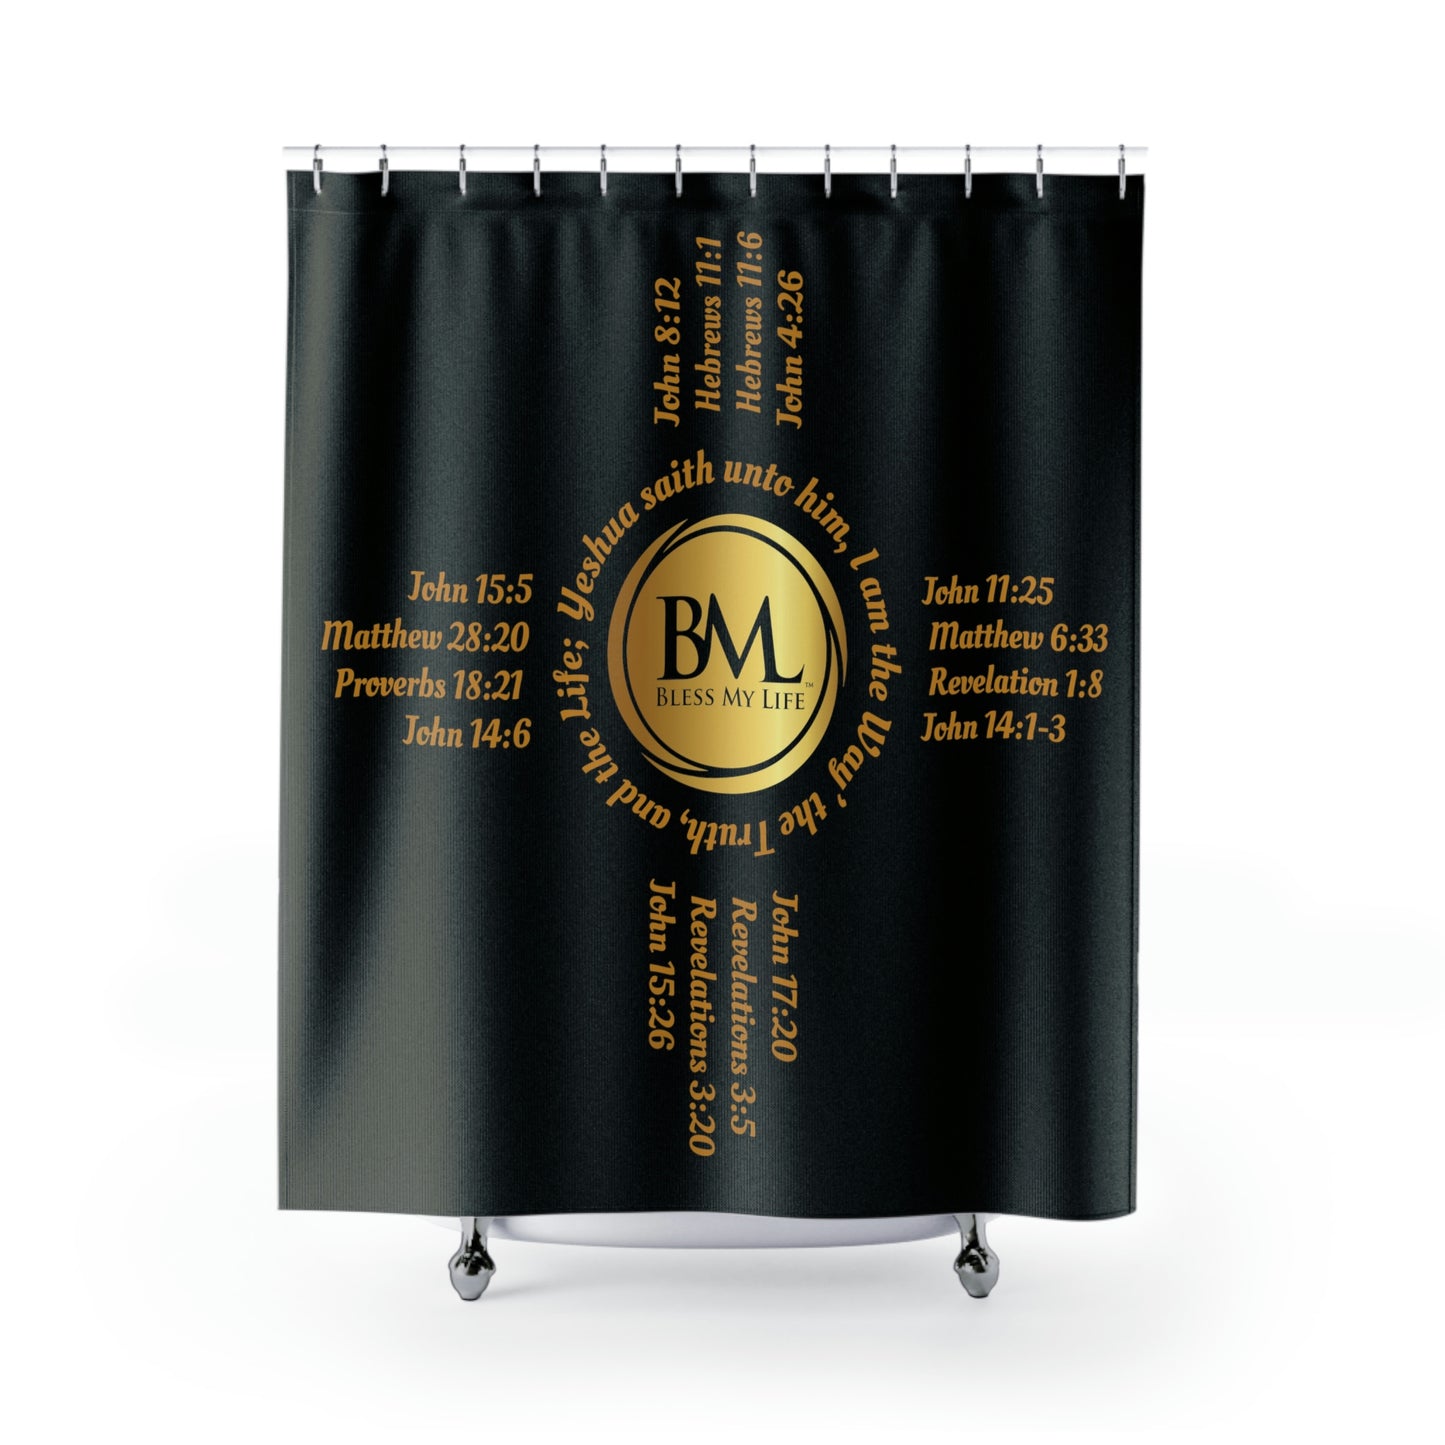 Zia Symbols with Biblical Scriptures, A New Mexico Icon & Favorite! Black Shower Curtains with Gold and Black Zia!